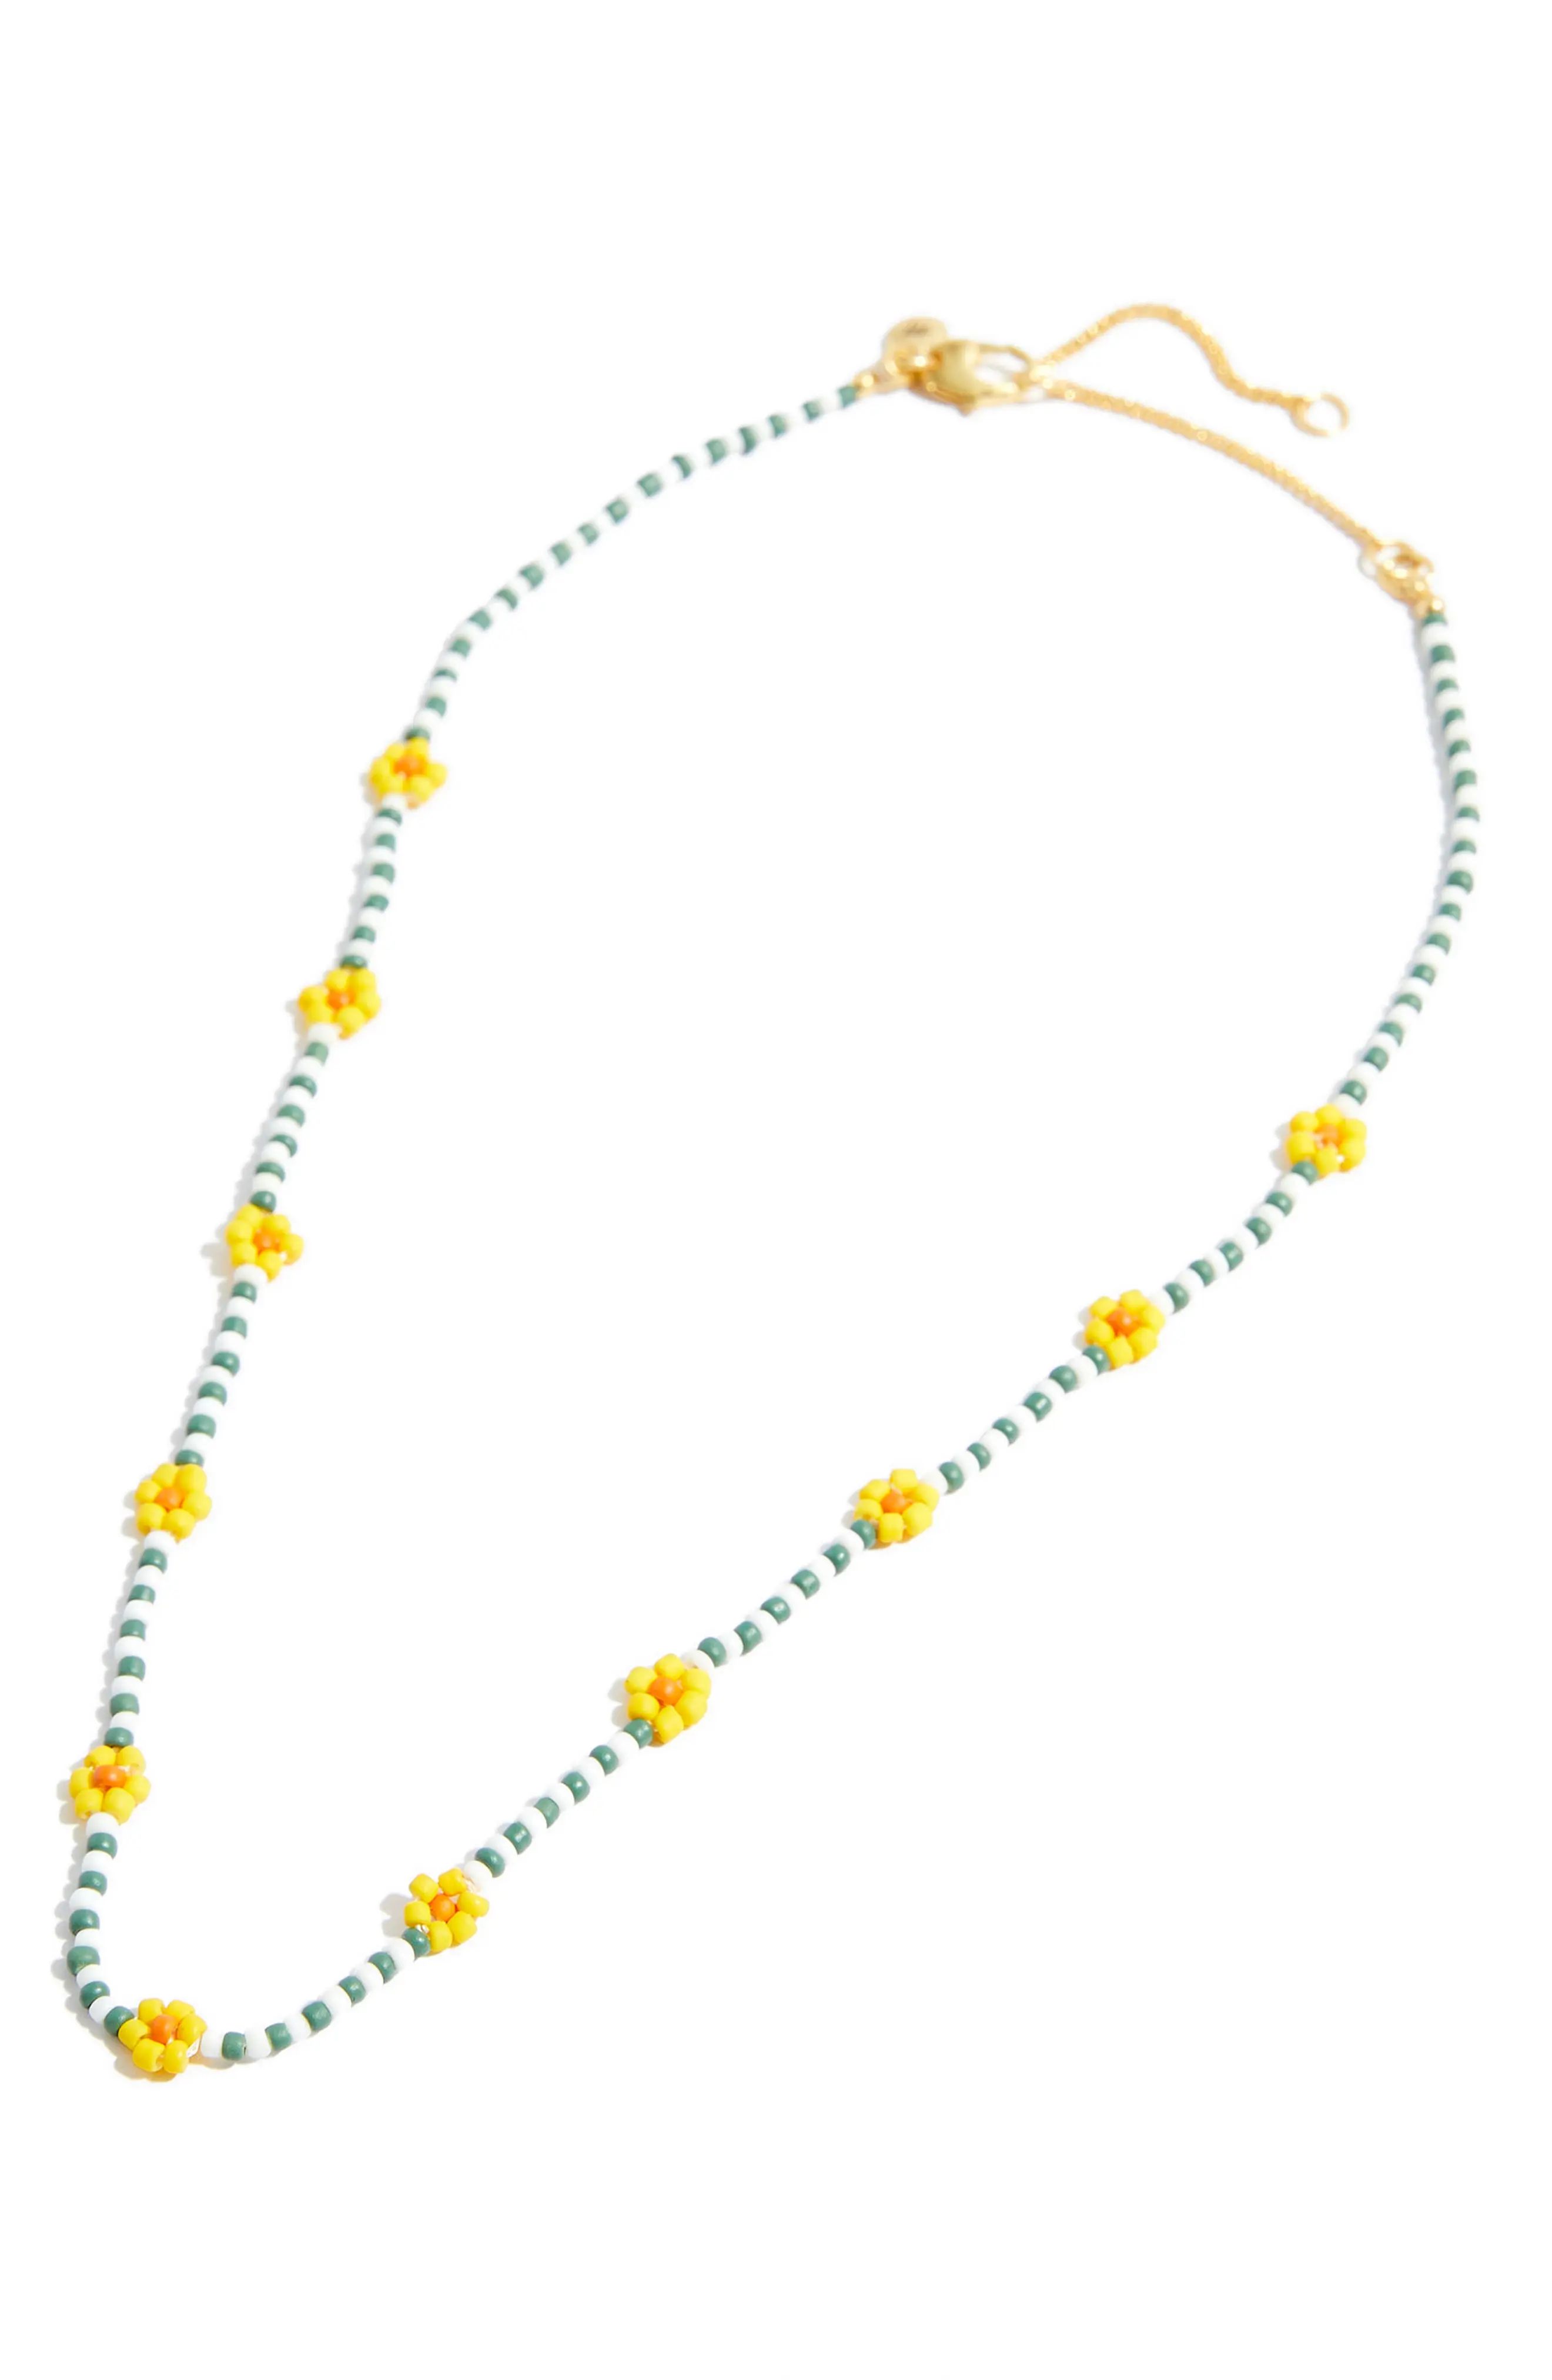 Madewell Striped Seed Bead Daisy Choker Necklace in Heather Camouflage at Nordstrom | Nordstrom